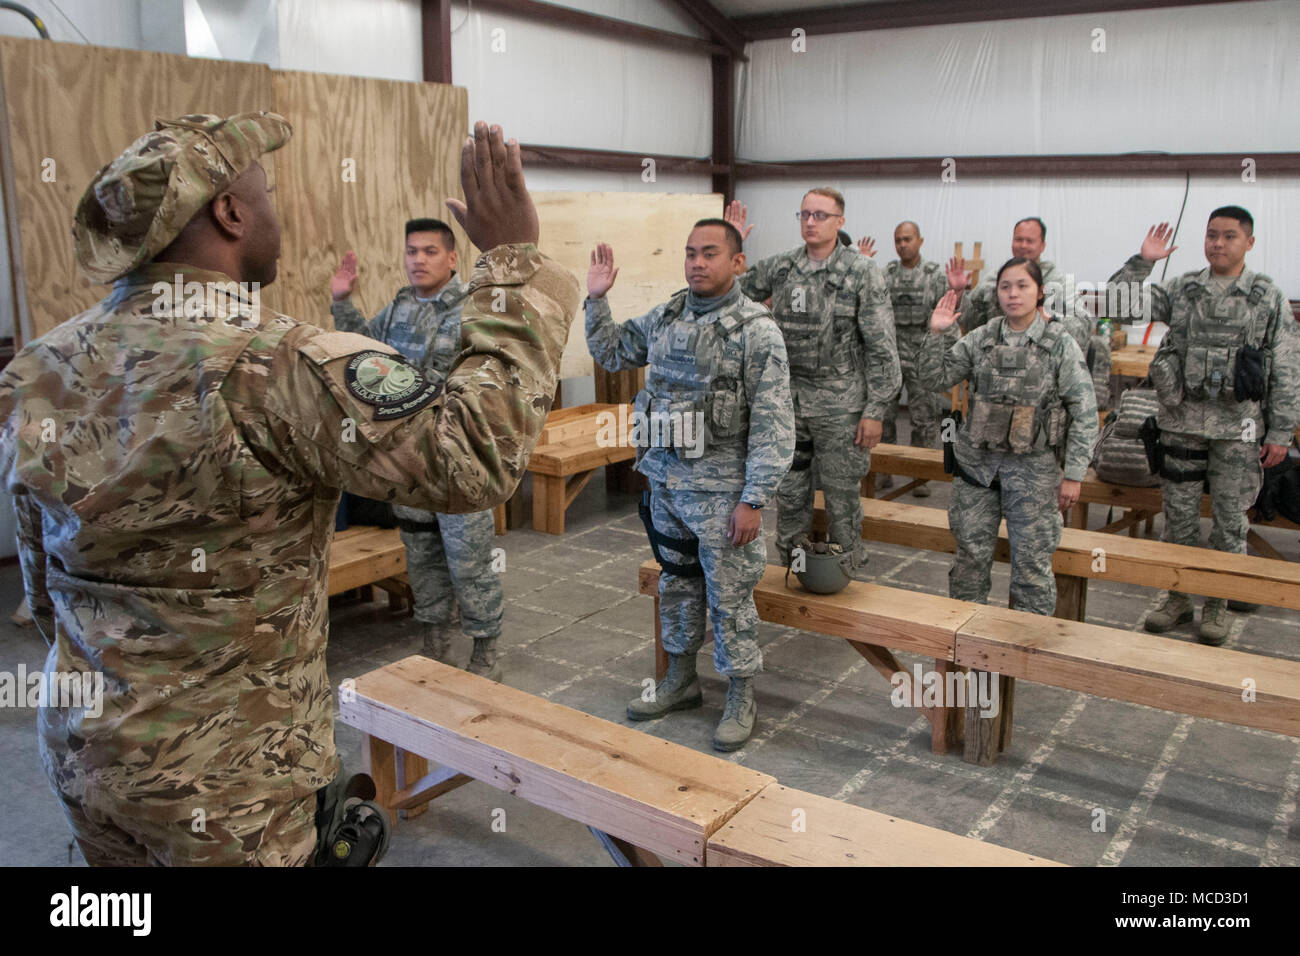 Airmen from the 154th Security Forces Squadron recite an oath as they are unofficially deputized under the authority of police Capt. Dale Bell, Mississippi Department of Wildlife, Fisheries and Parks Special Response Team chief, Feb. 13, 2018, at Camp Shelby, Mississippi. The defenders traveled from their home unit at Joint Base Pearl Harbor-Hickam, Hawaii, to serve as a backup-support for the MWFP SRT during exercise Patriot South. (U.S. Air National Guard photo by Senior Airman John Linzmeier) Stock Photo